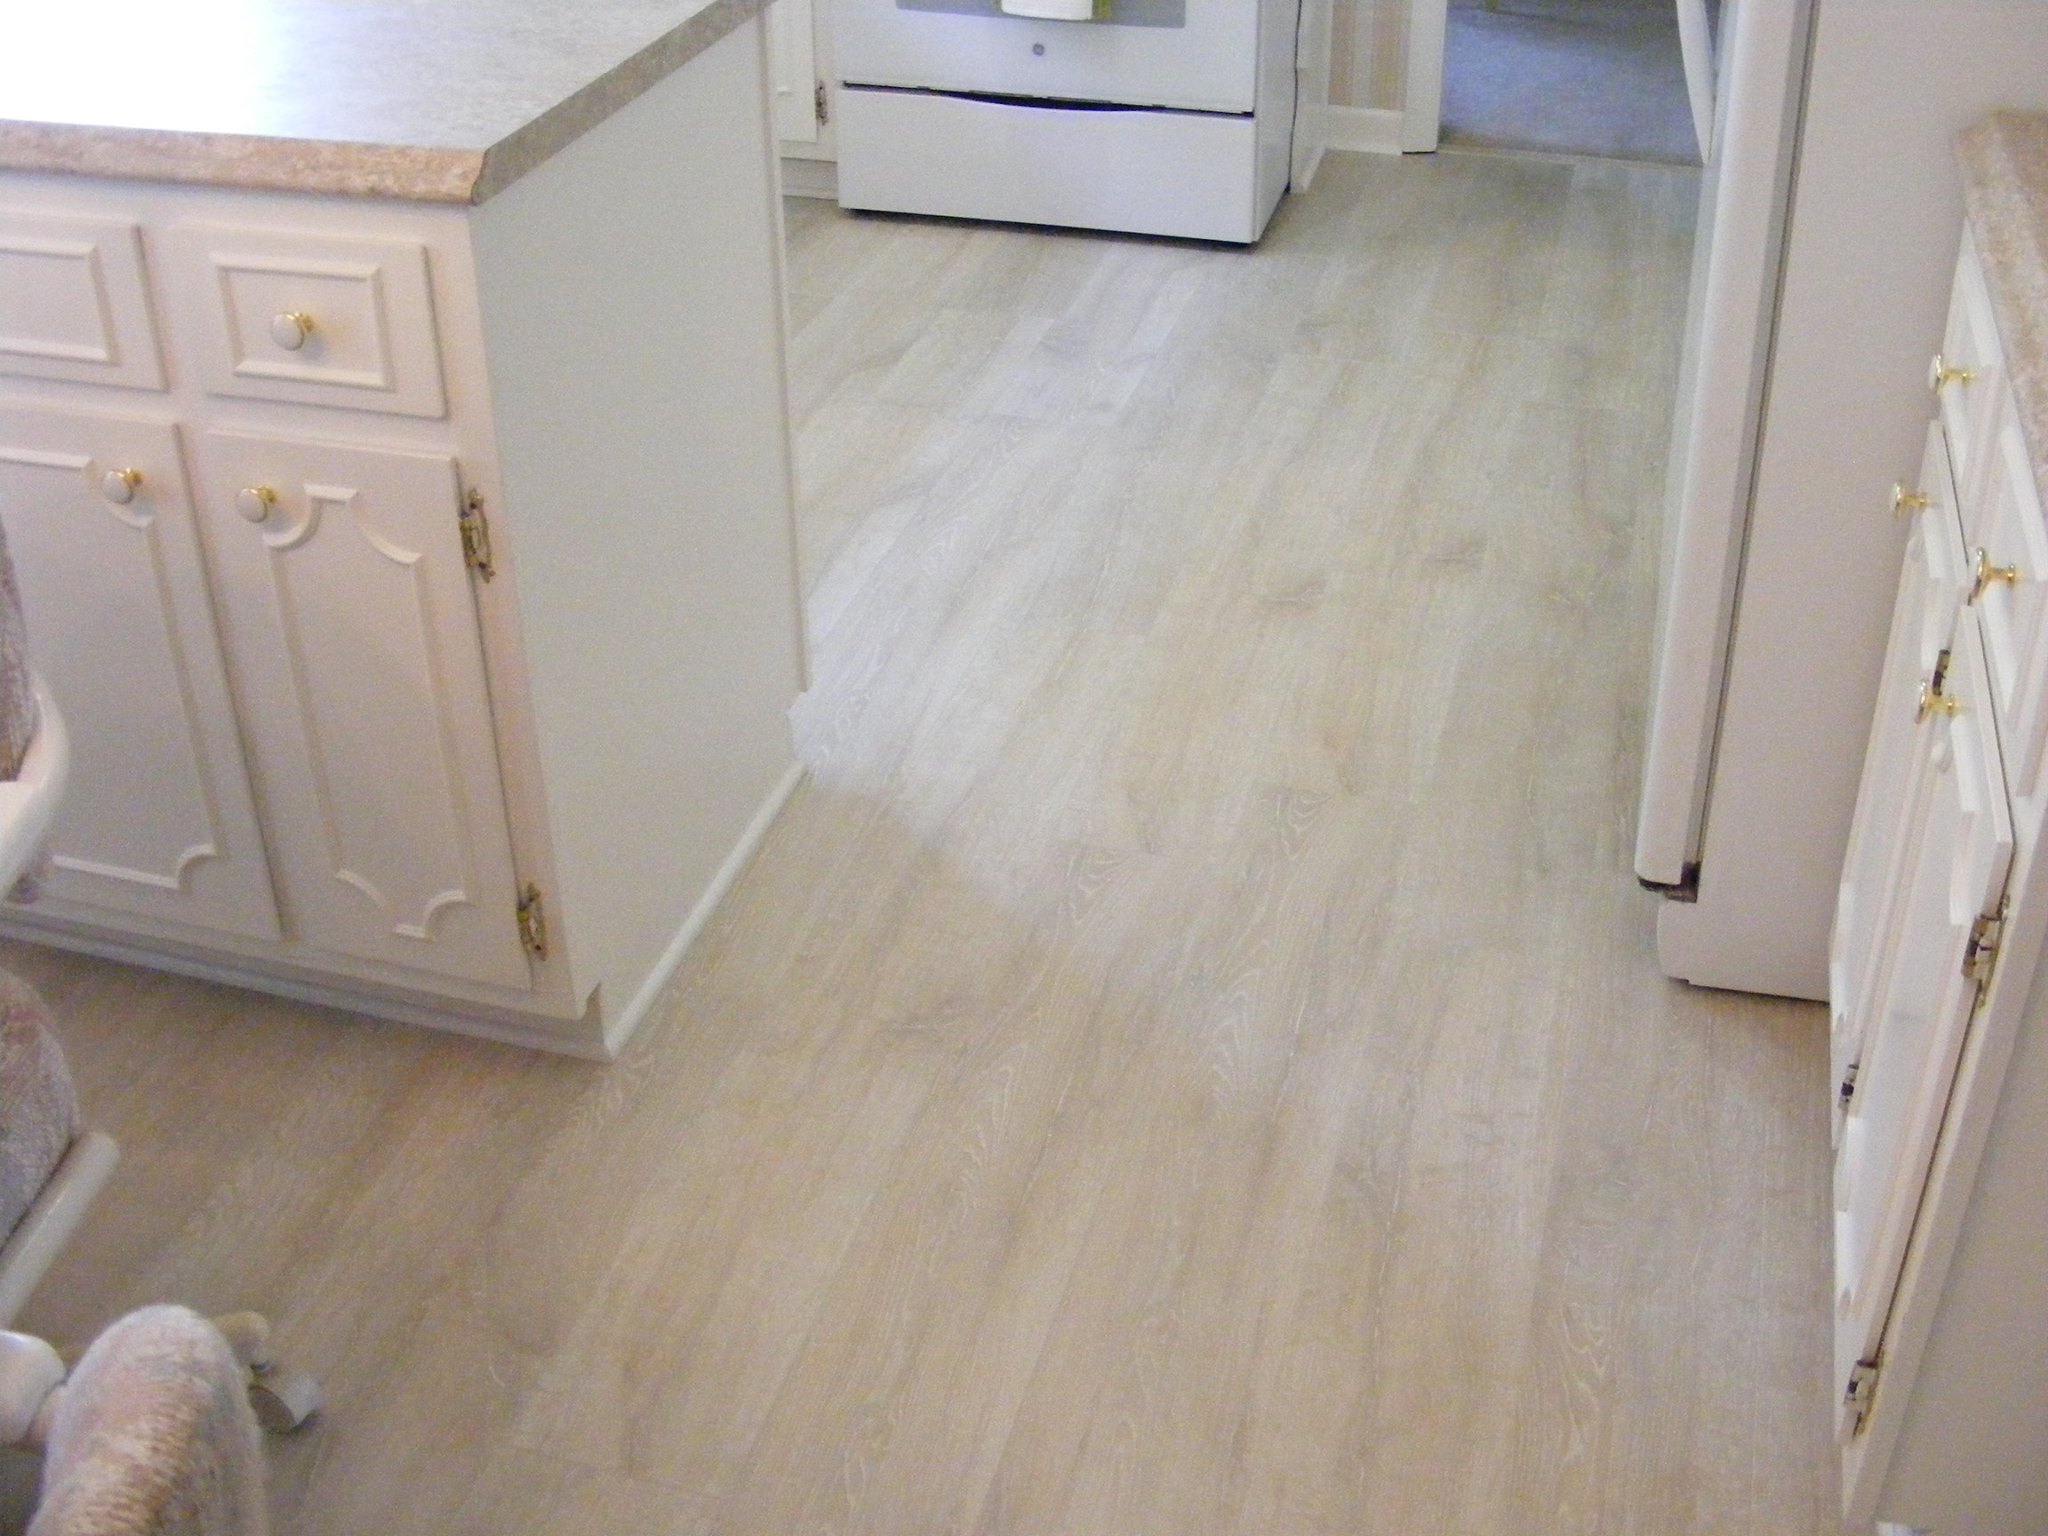 Laminate Flooring Gives Great Looks Without Great Cost